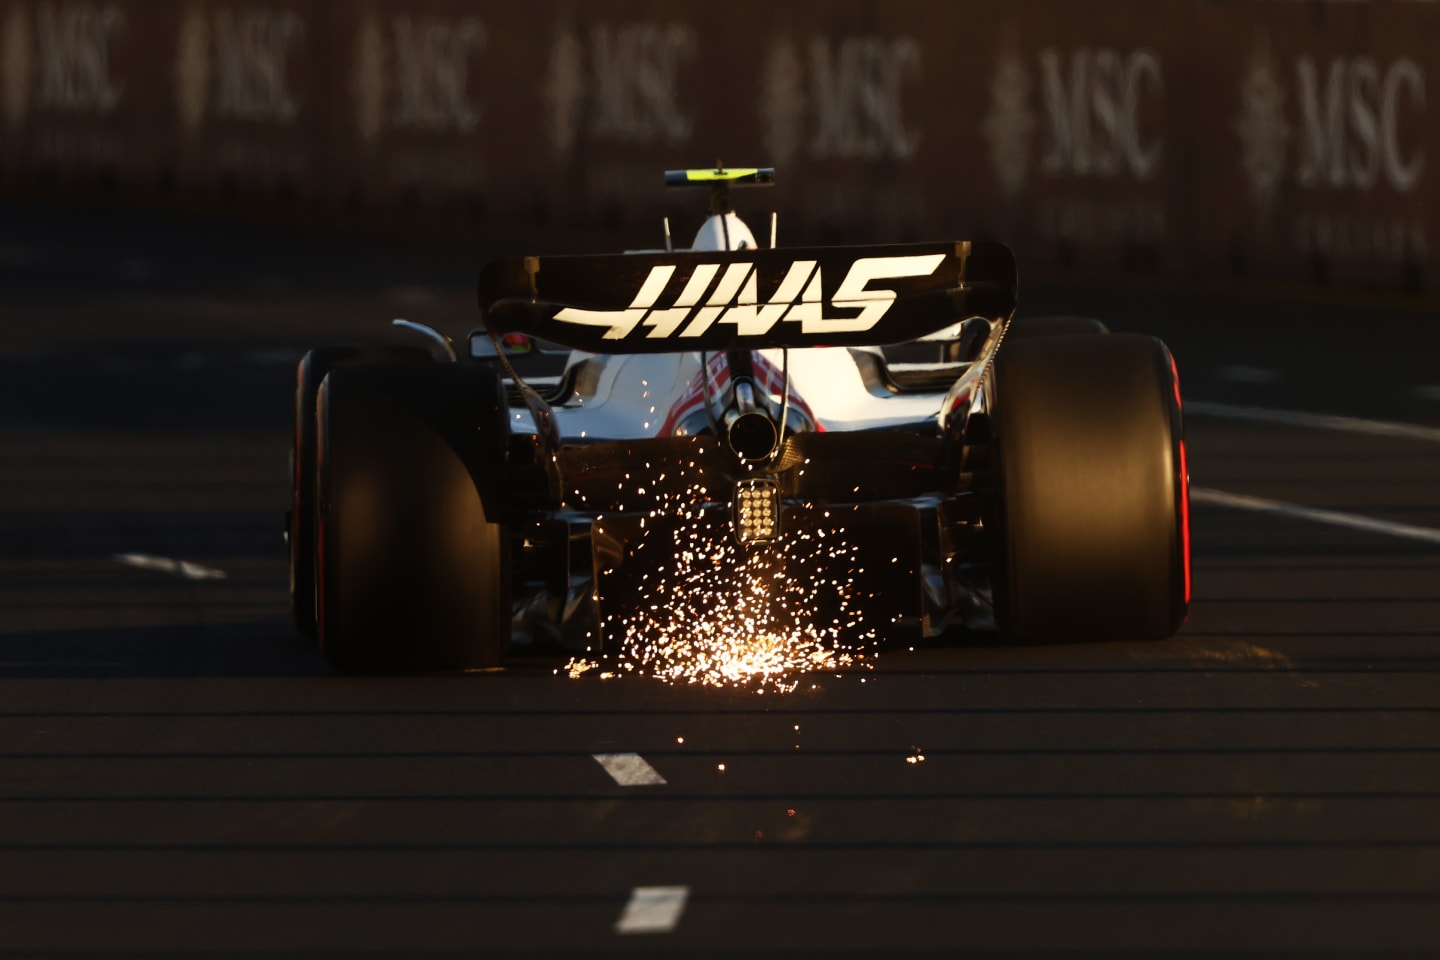 MELBOURNE, AUSTRALIA - APRIL 09: Sparks fly behind Mick Schumacher of Germany driving the (47) Haas F1 VF-22 Ferrari on track during qualifying ahead of the F1 Grand Prix of Australia at Melbourne Grand Prix Circuit on April 09, 2022 in Melbourne, Australia. (Photo by Bryn Lennon - Formula 1/Formula 1 via Getty Images)